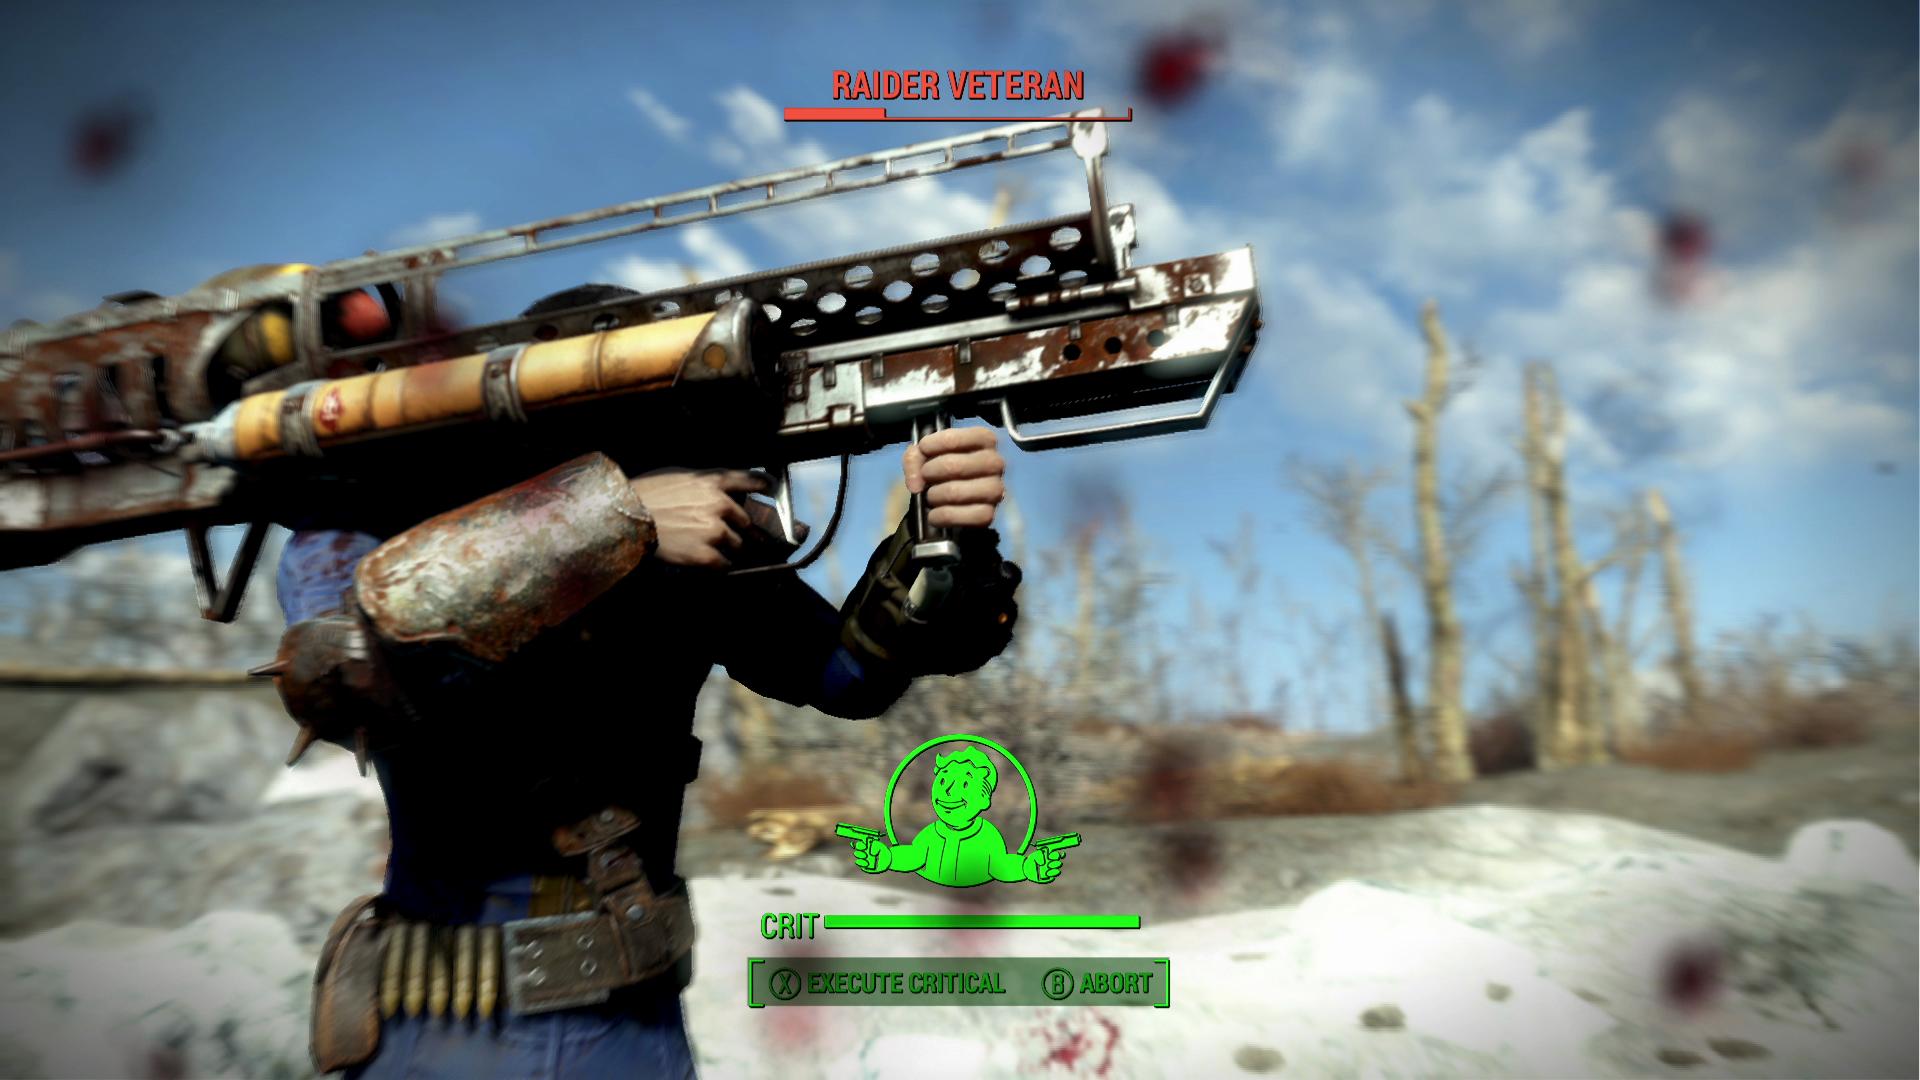 how to increase frame rate fallout 4